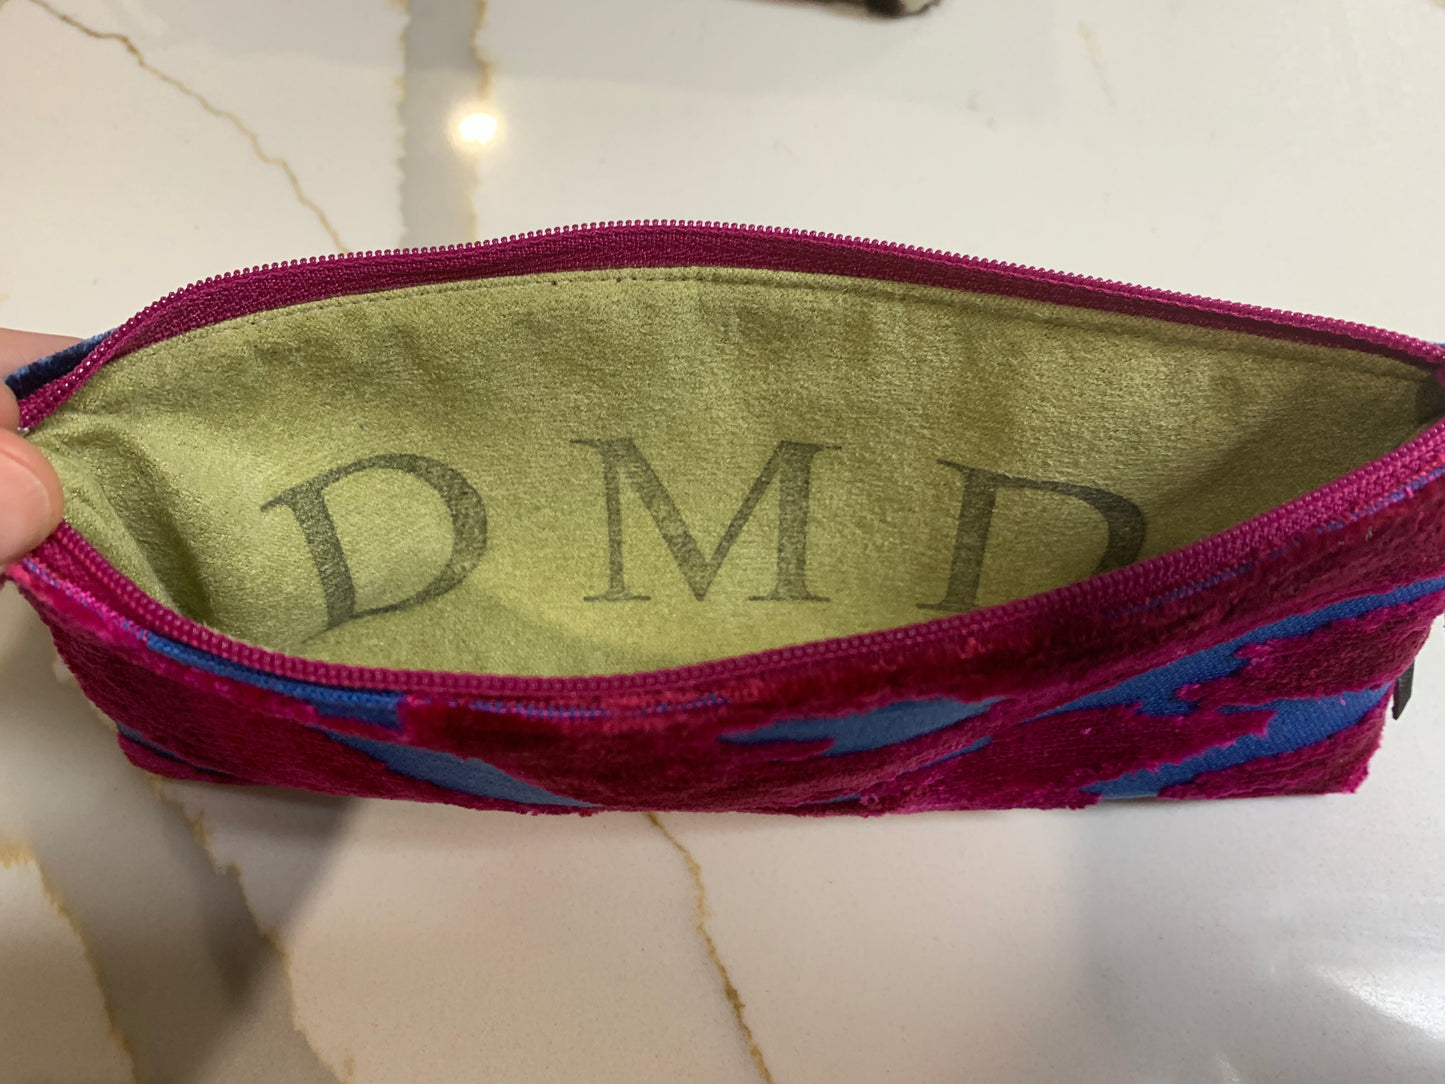 Hot Pink & Bright Blue - DMD Bags